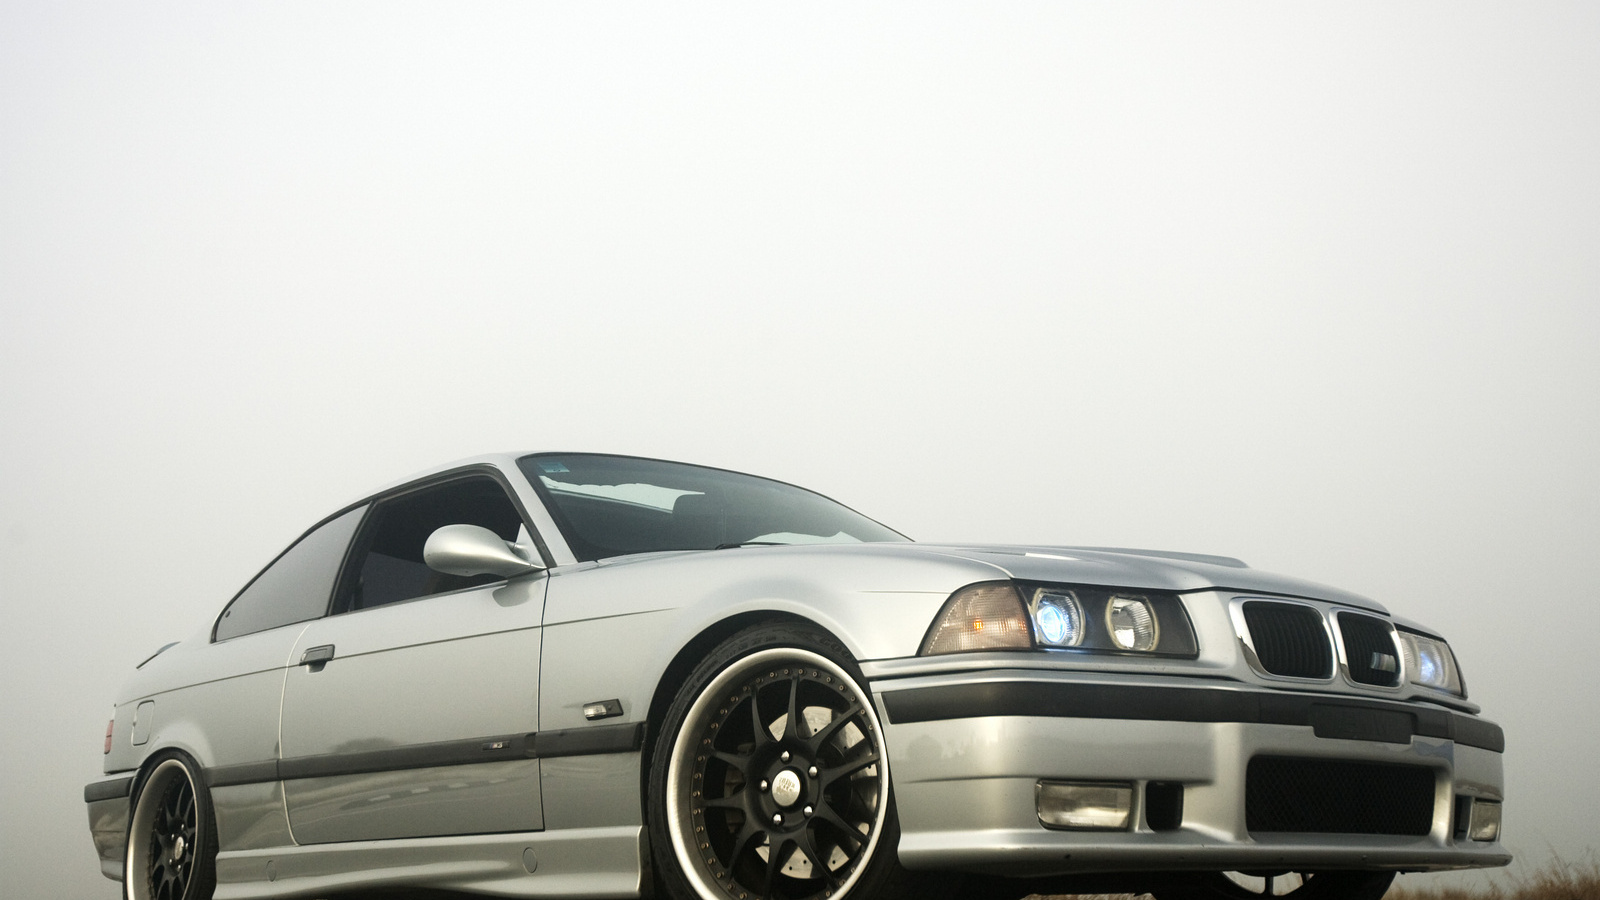 HD wallpapers BMW E36 M3 Series BMW Three Coupe sports car